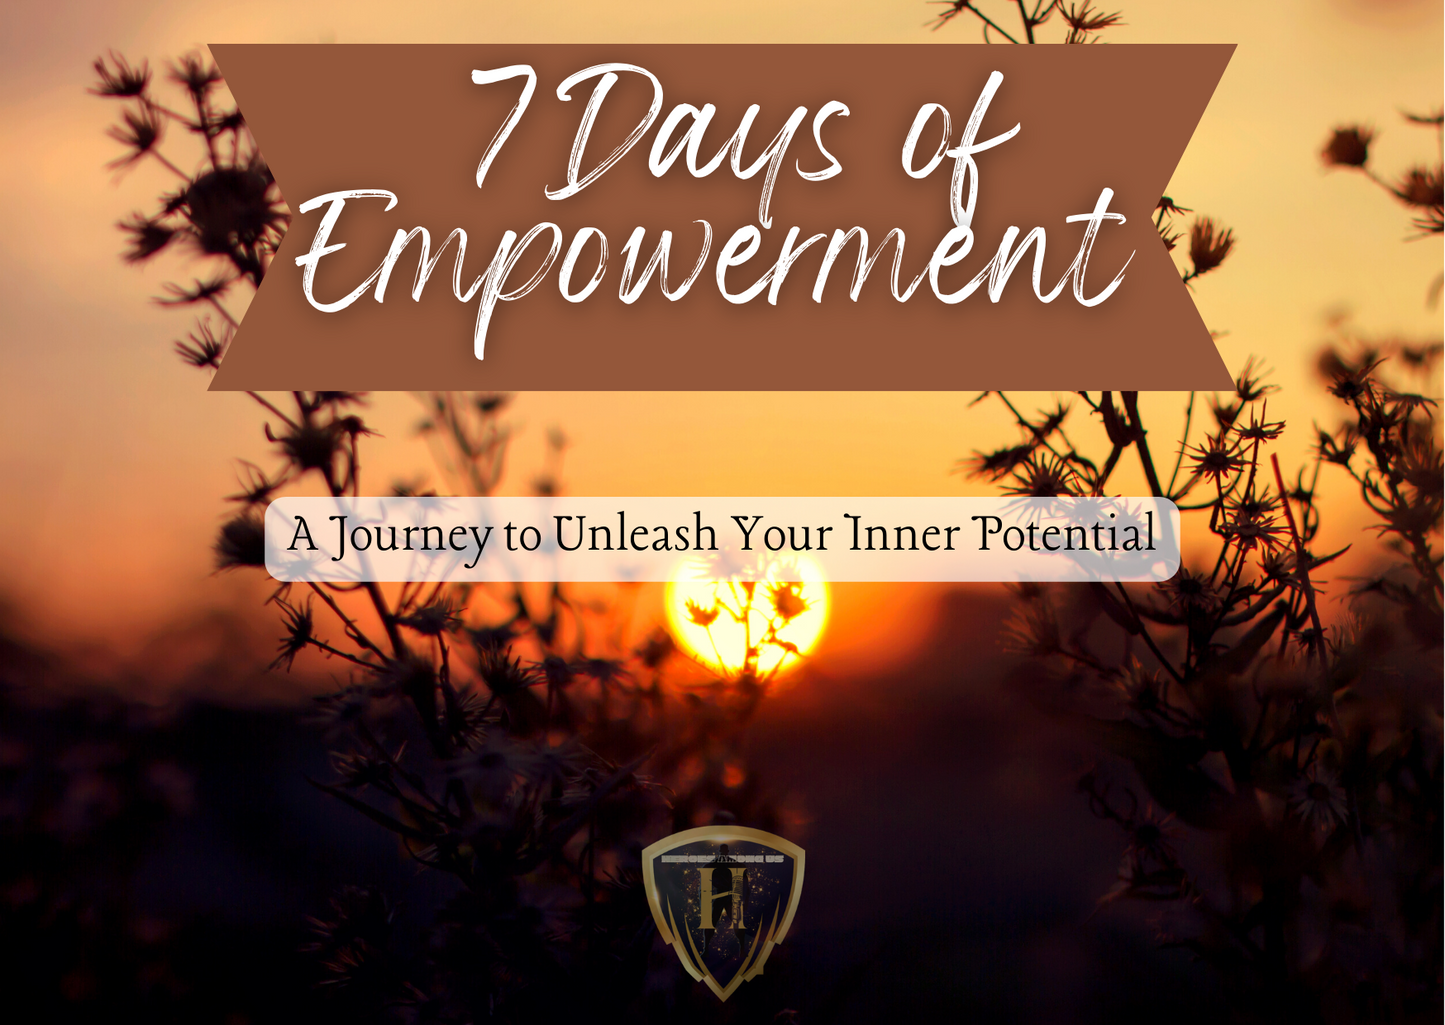 Free "7 Days of Empowerment", A Journey to Unleash Your Inner Potential